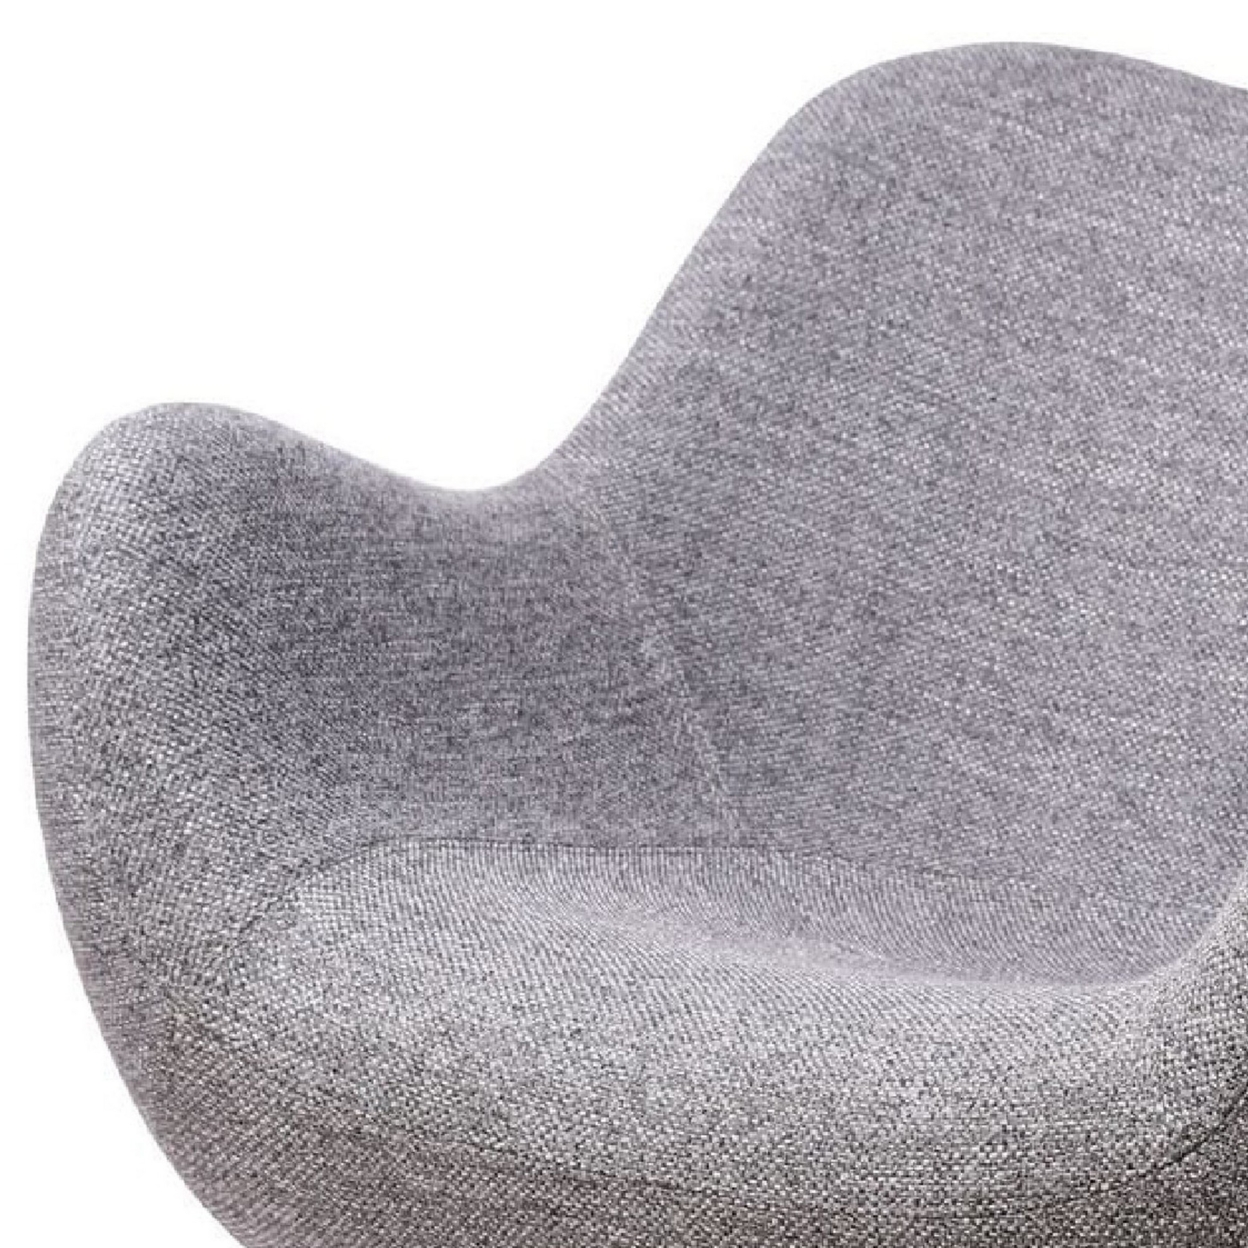 Cid 28 Inch Modern Accent Chair, Rounded Backrest, Fabric, Gray- Saltoro Sherpi